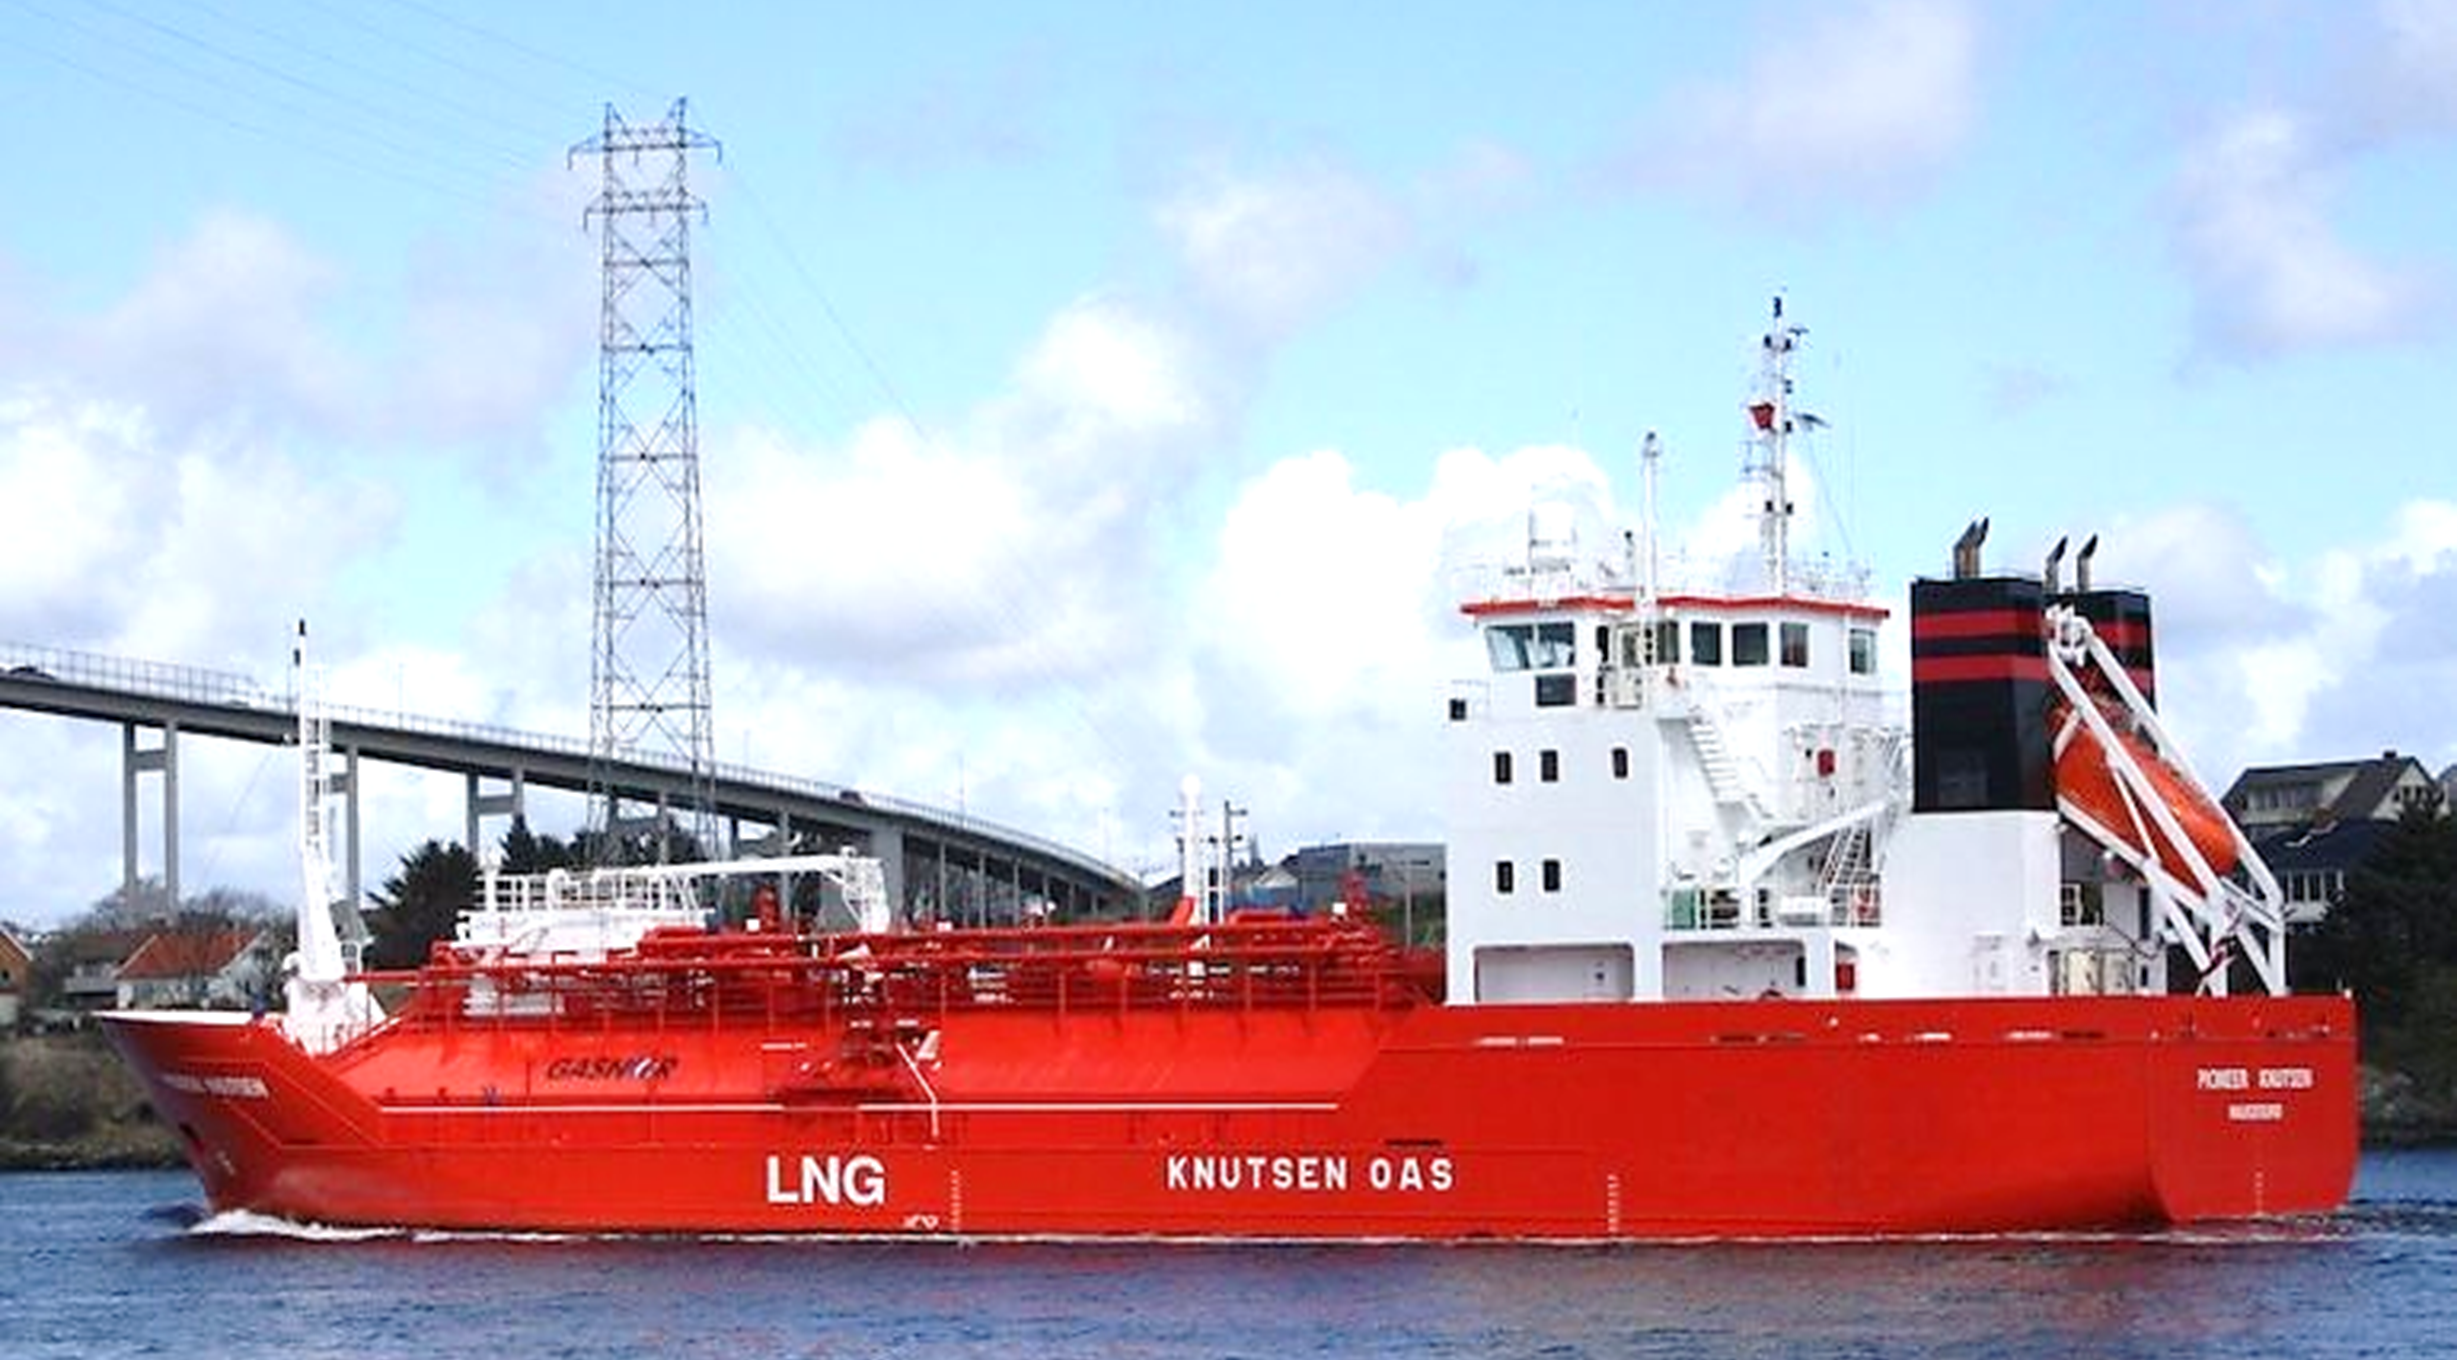 Edison-Knutsen long-term contract for a mid-sized LNG carrier